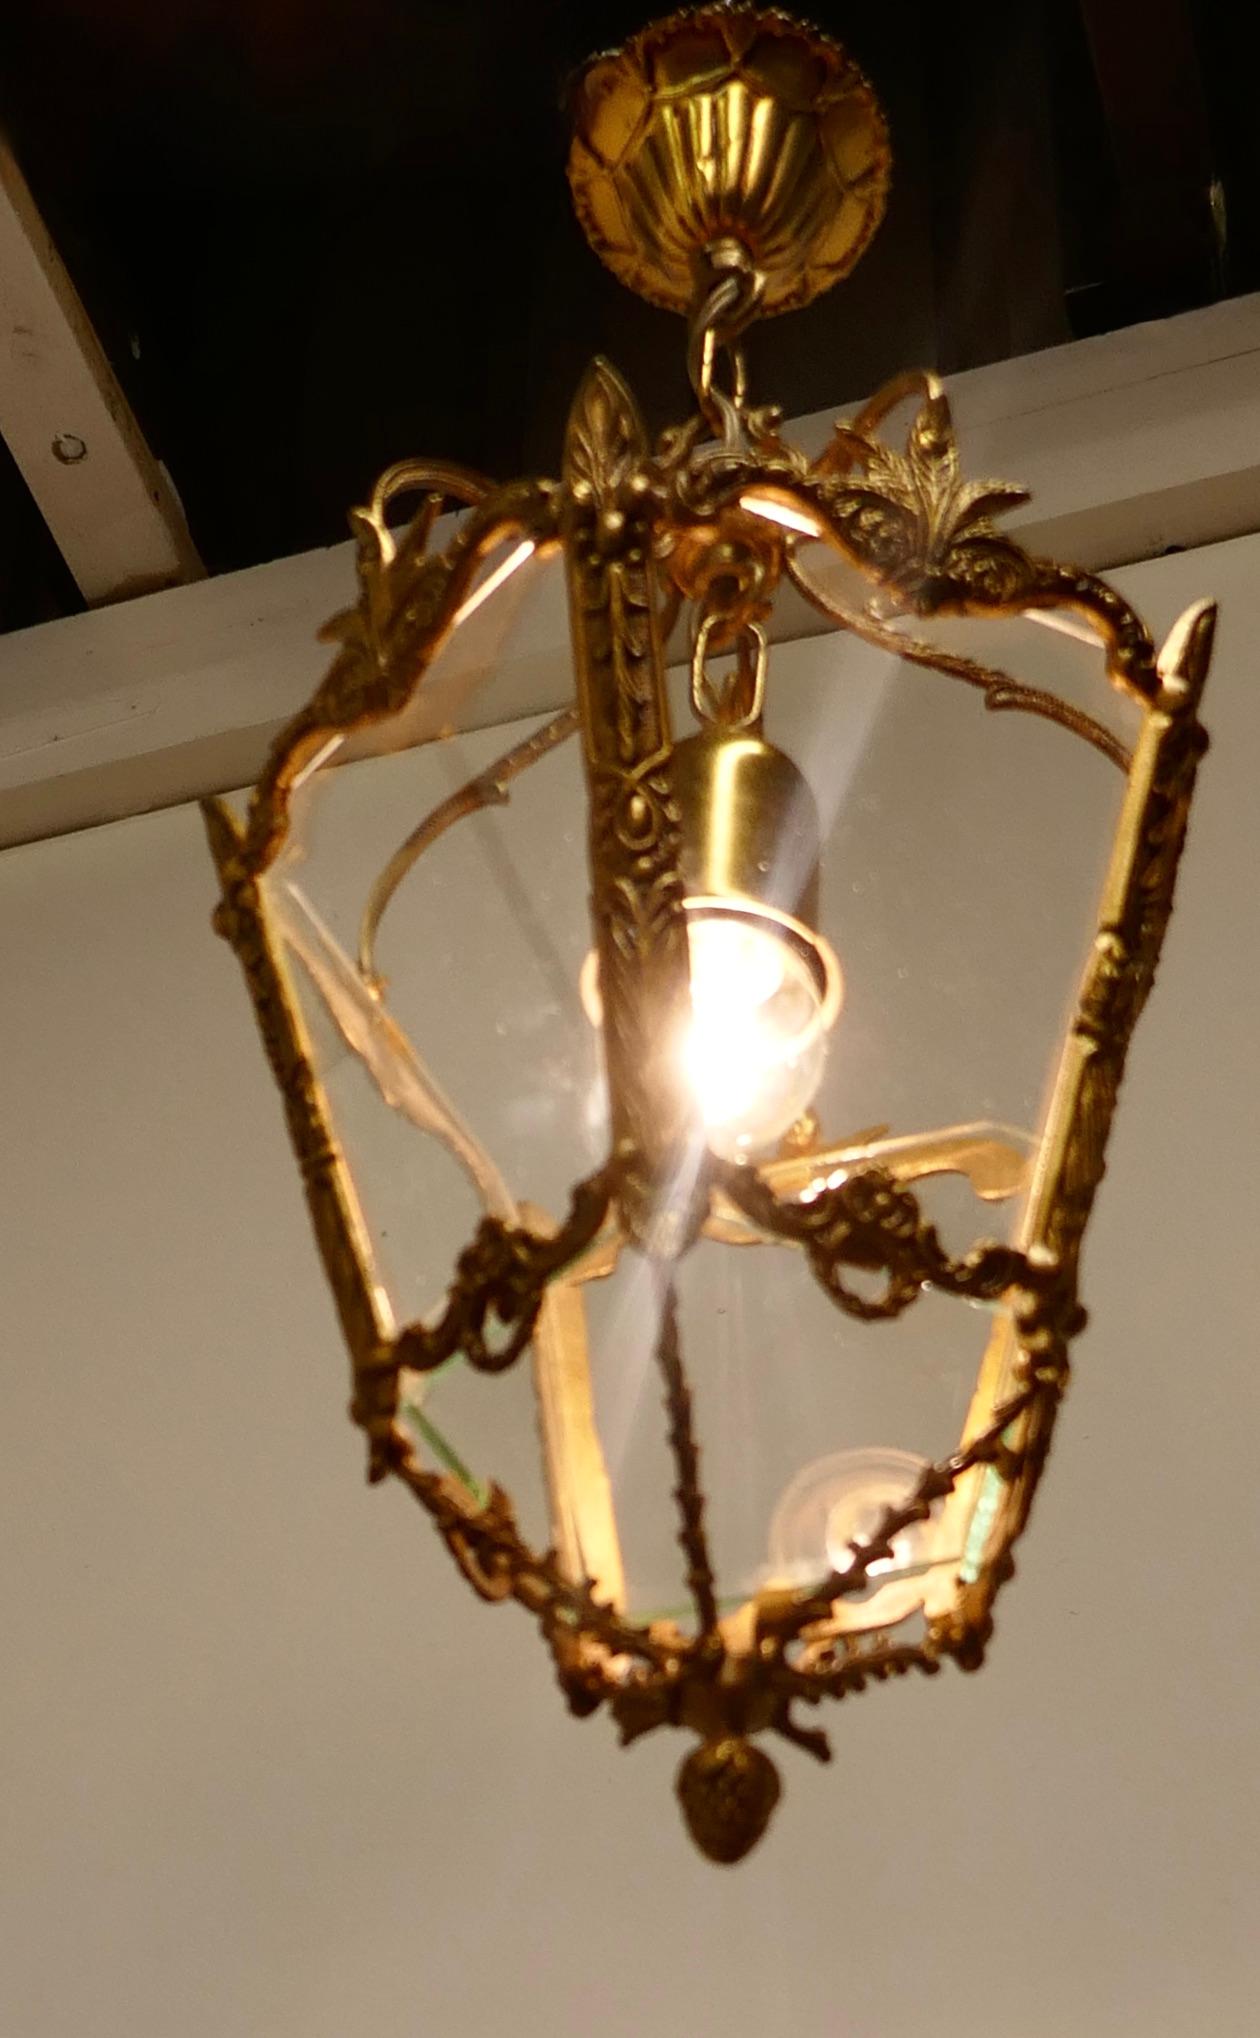 Decorative French gilt brass lantern pendant light

A superb quality brass lantern, the light has 5 glass panels, the lantern is decorated in the French style with ribbons and leaves and it hangs on a brass ceiling rose
The lantern gives a